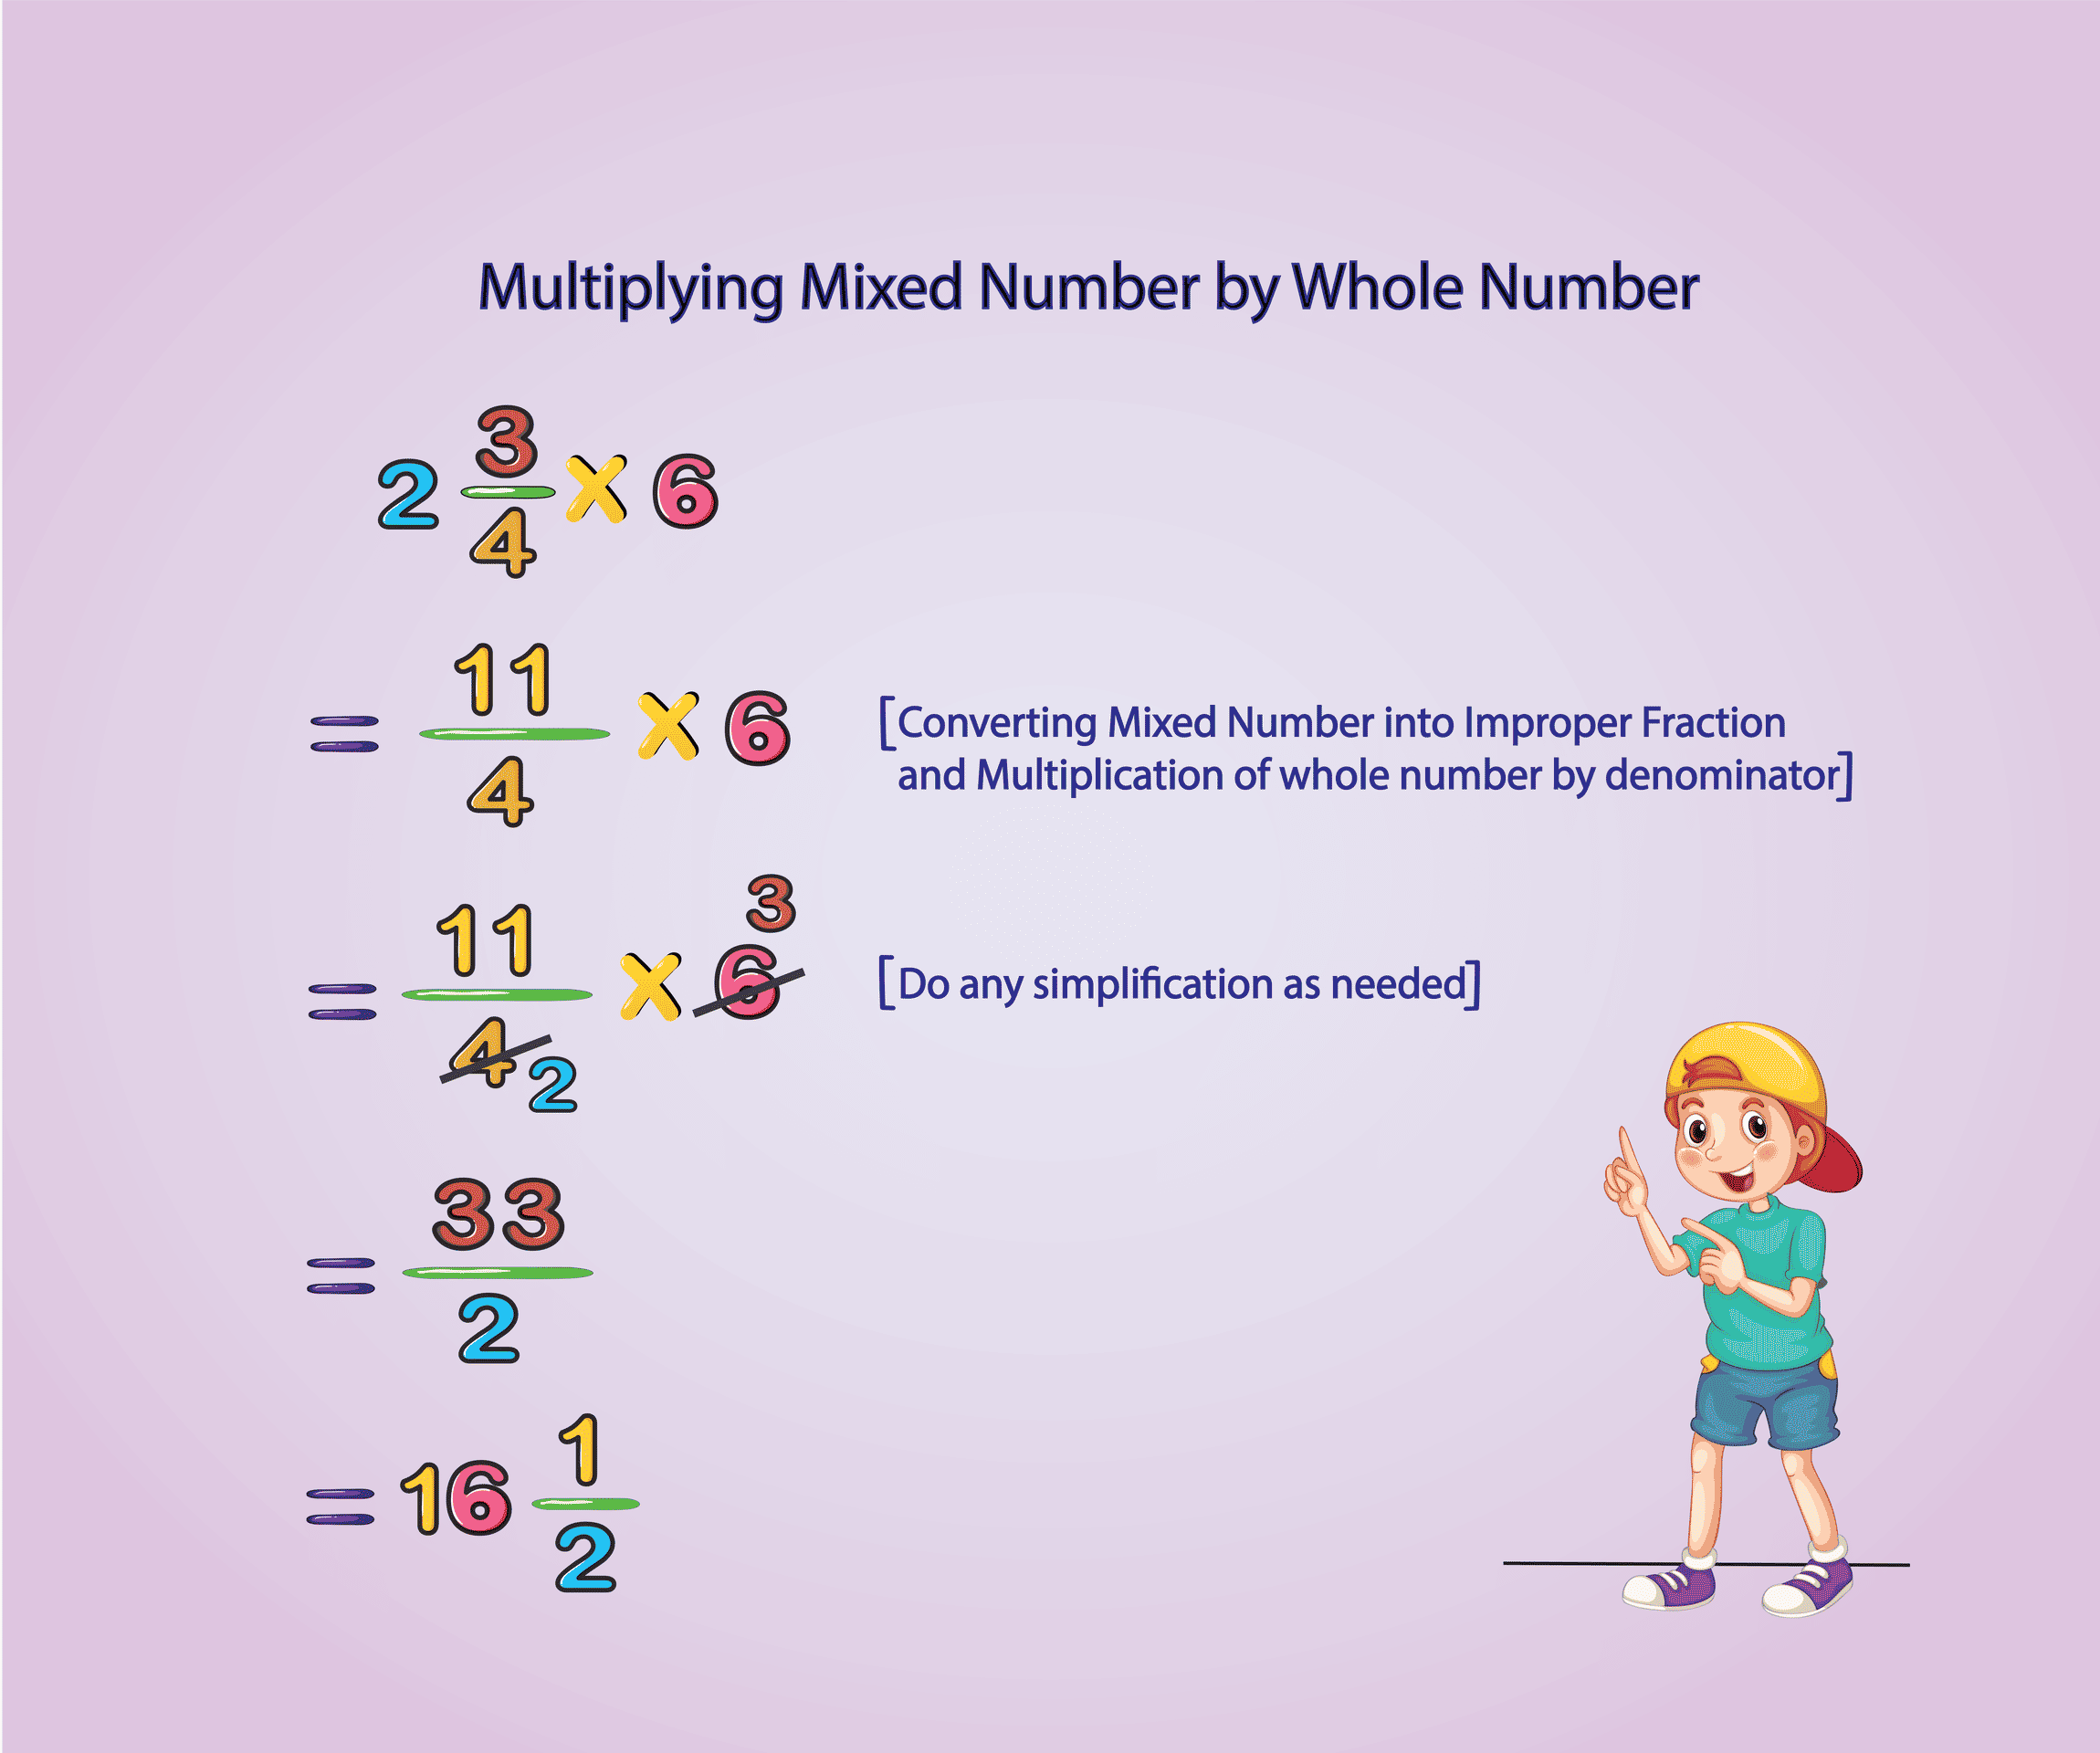 Multiplying Mixed Number by Whole Number